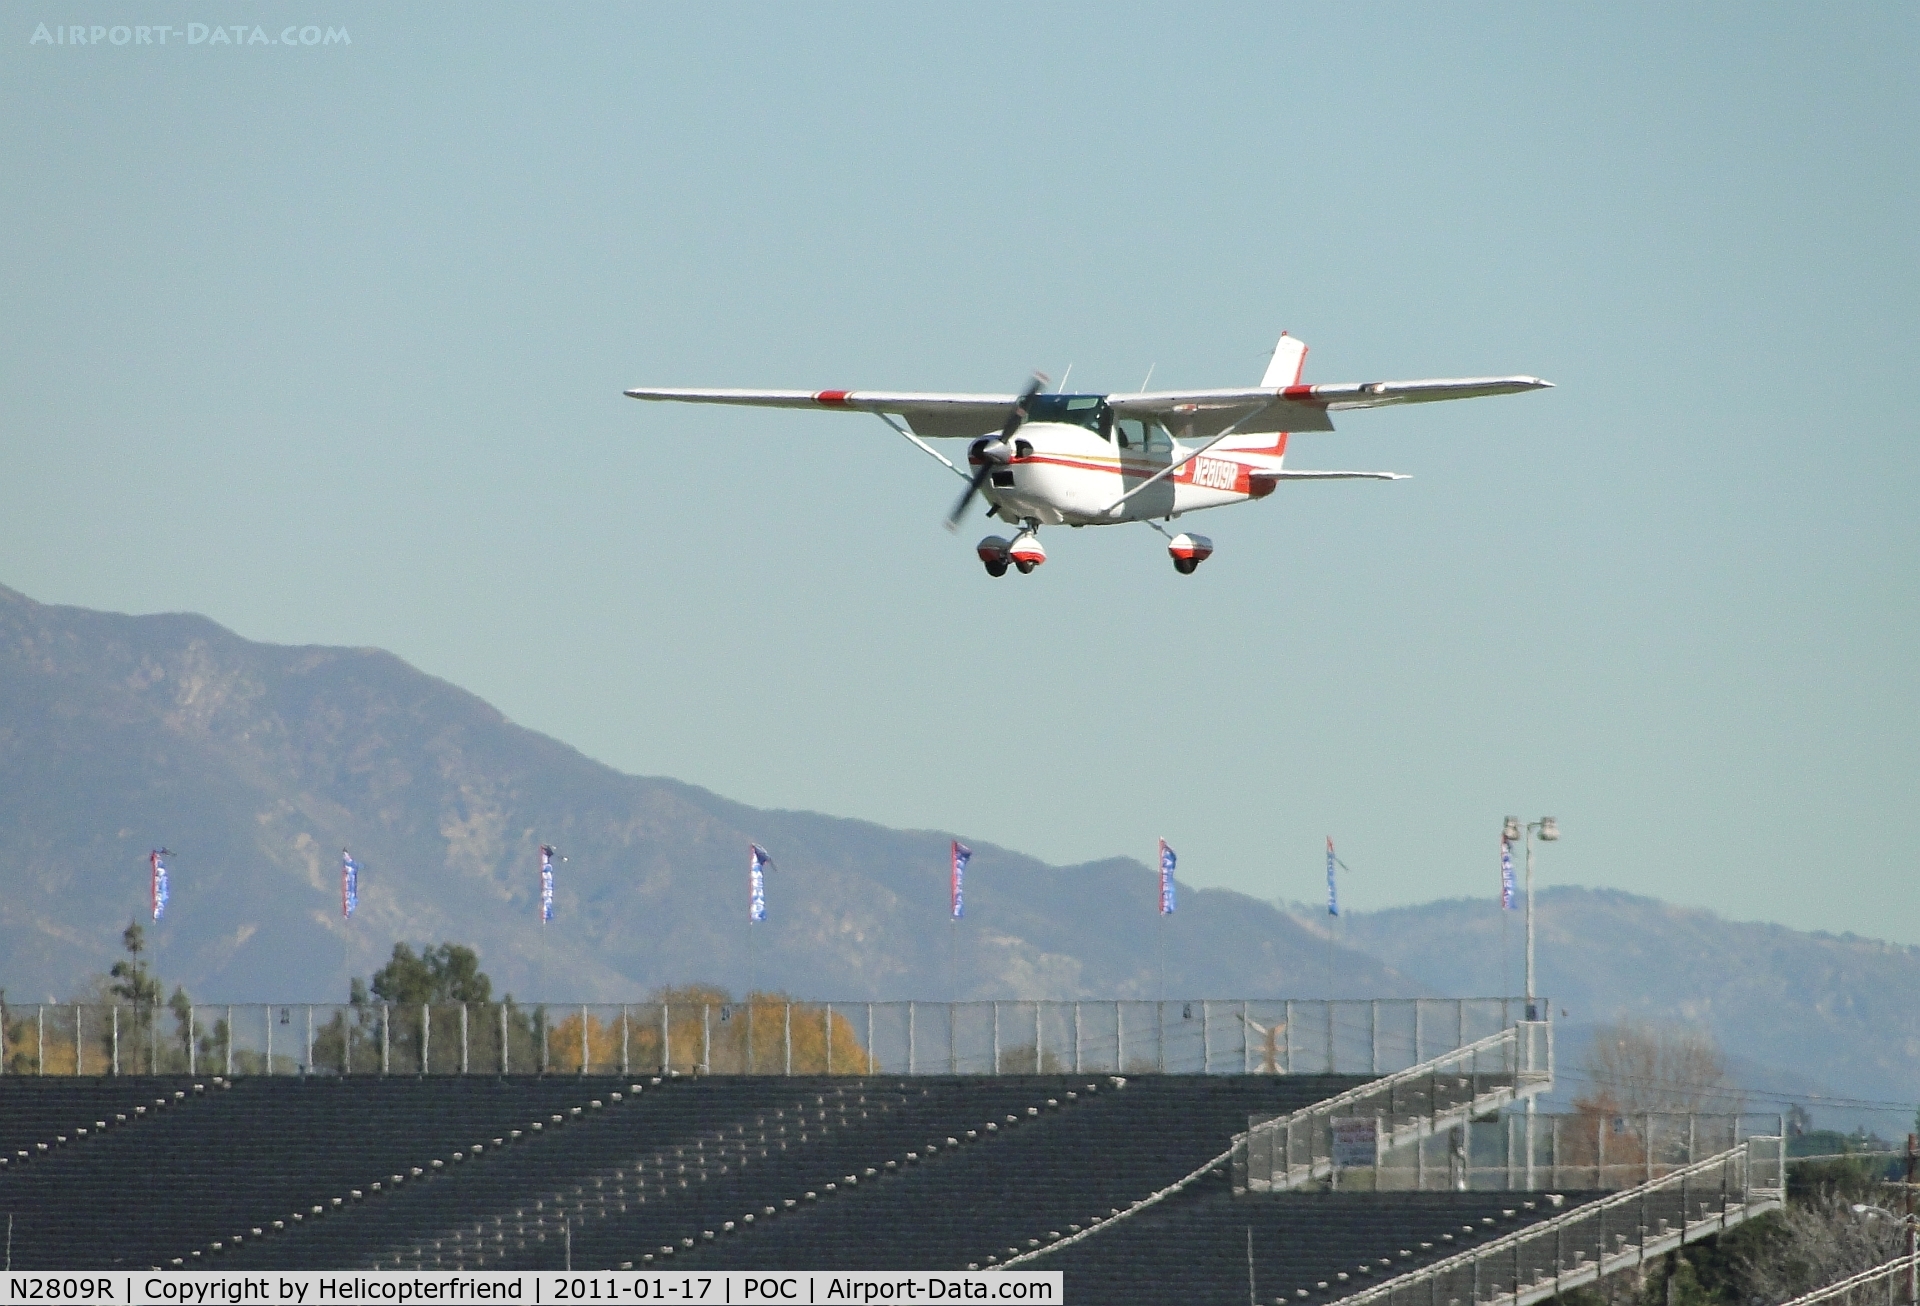 N2809R, 1967 Cessna 182K Skylane C/N 18258409, Over the fence and on final to runway 26L